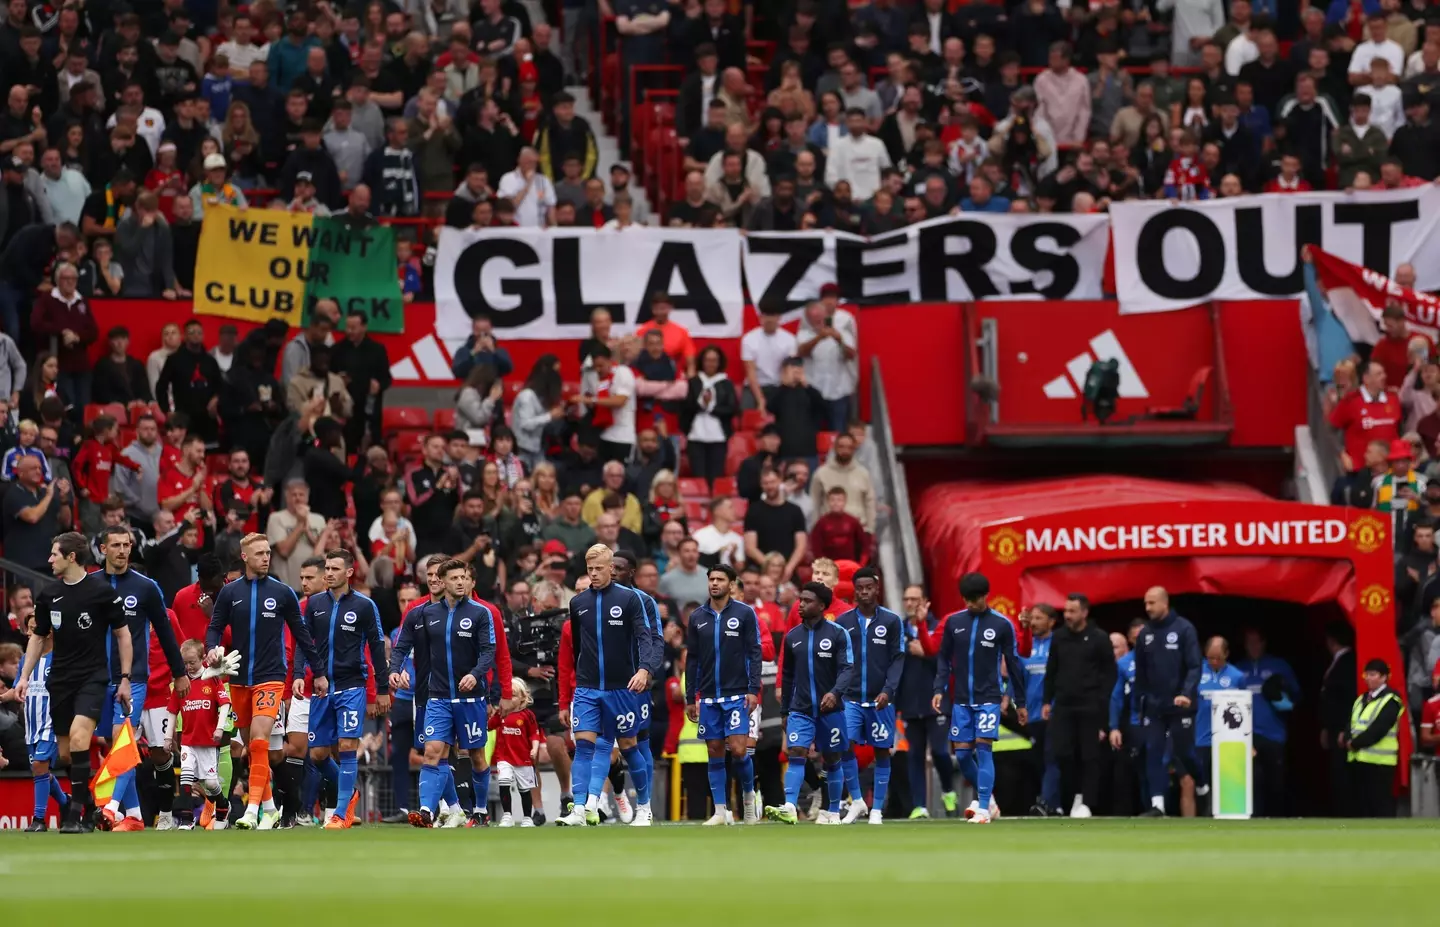 Manchester United fans protest against the Glazers. Image: Getty